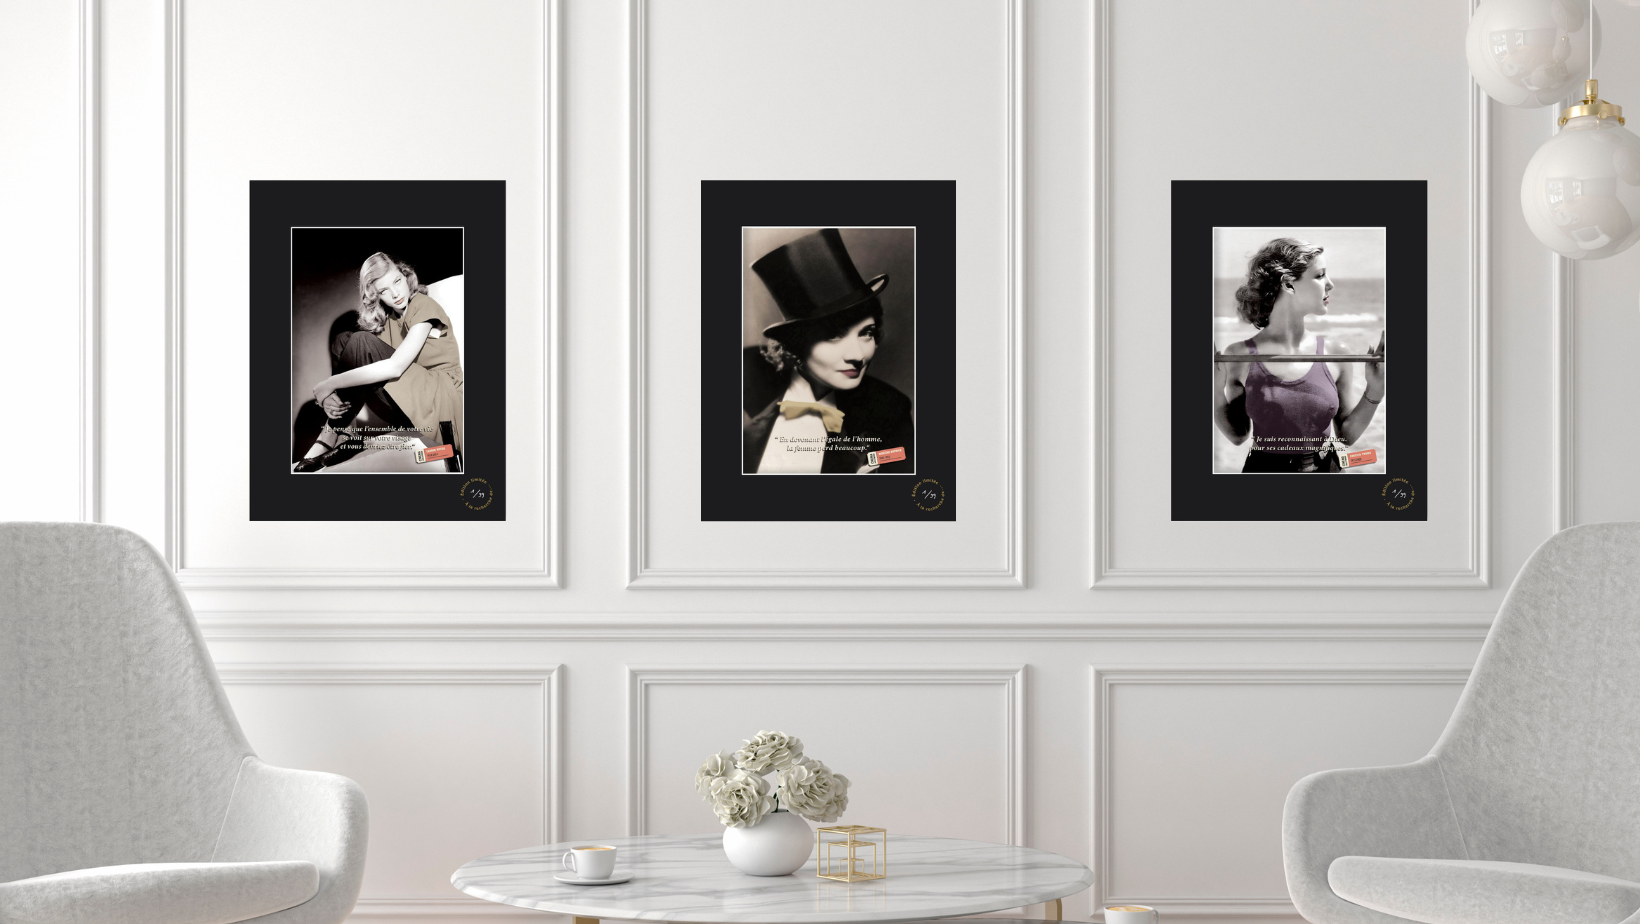 Tirages_de_colection_cinma_toiles-d-hollywood_akimoff_collections_Lauren_bacall_marlene_dietrich_loretta_young